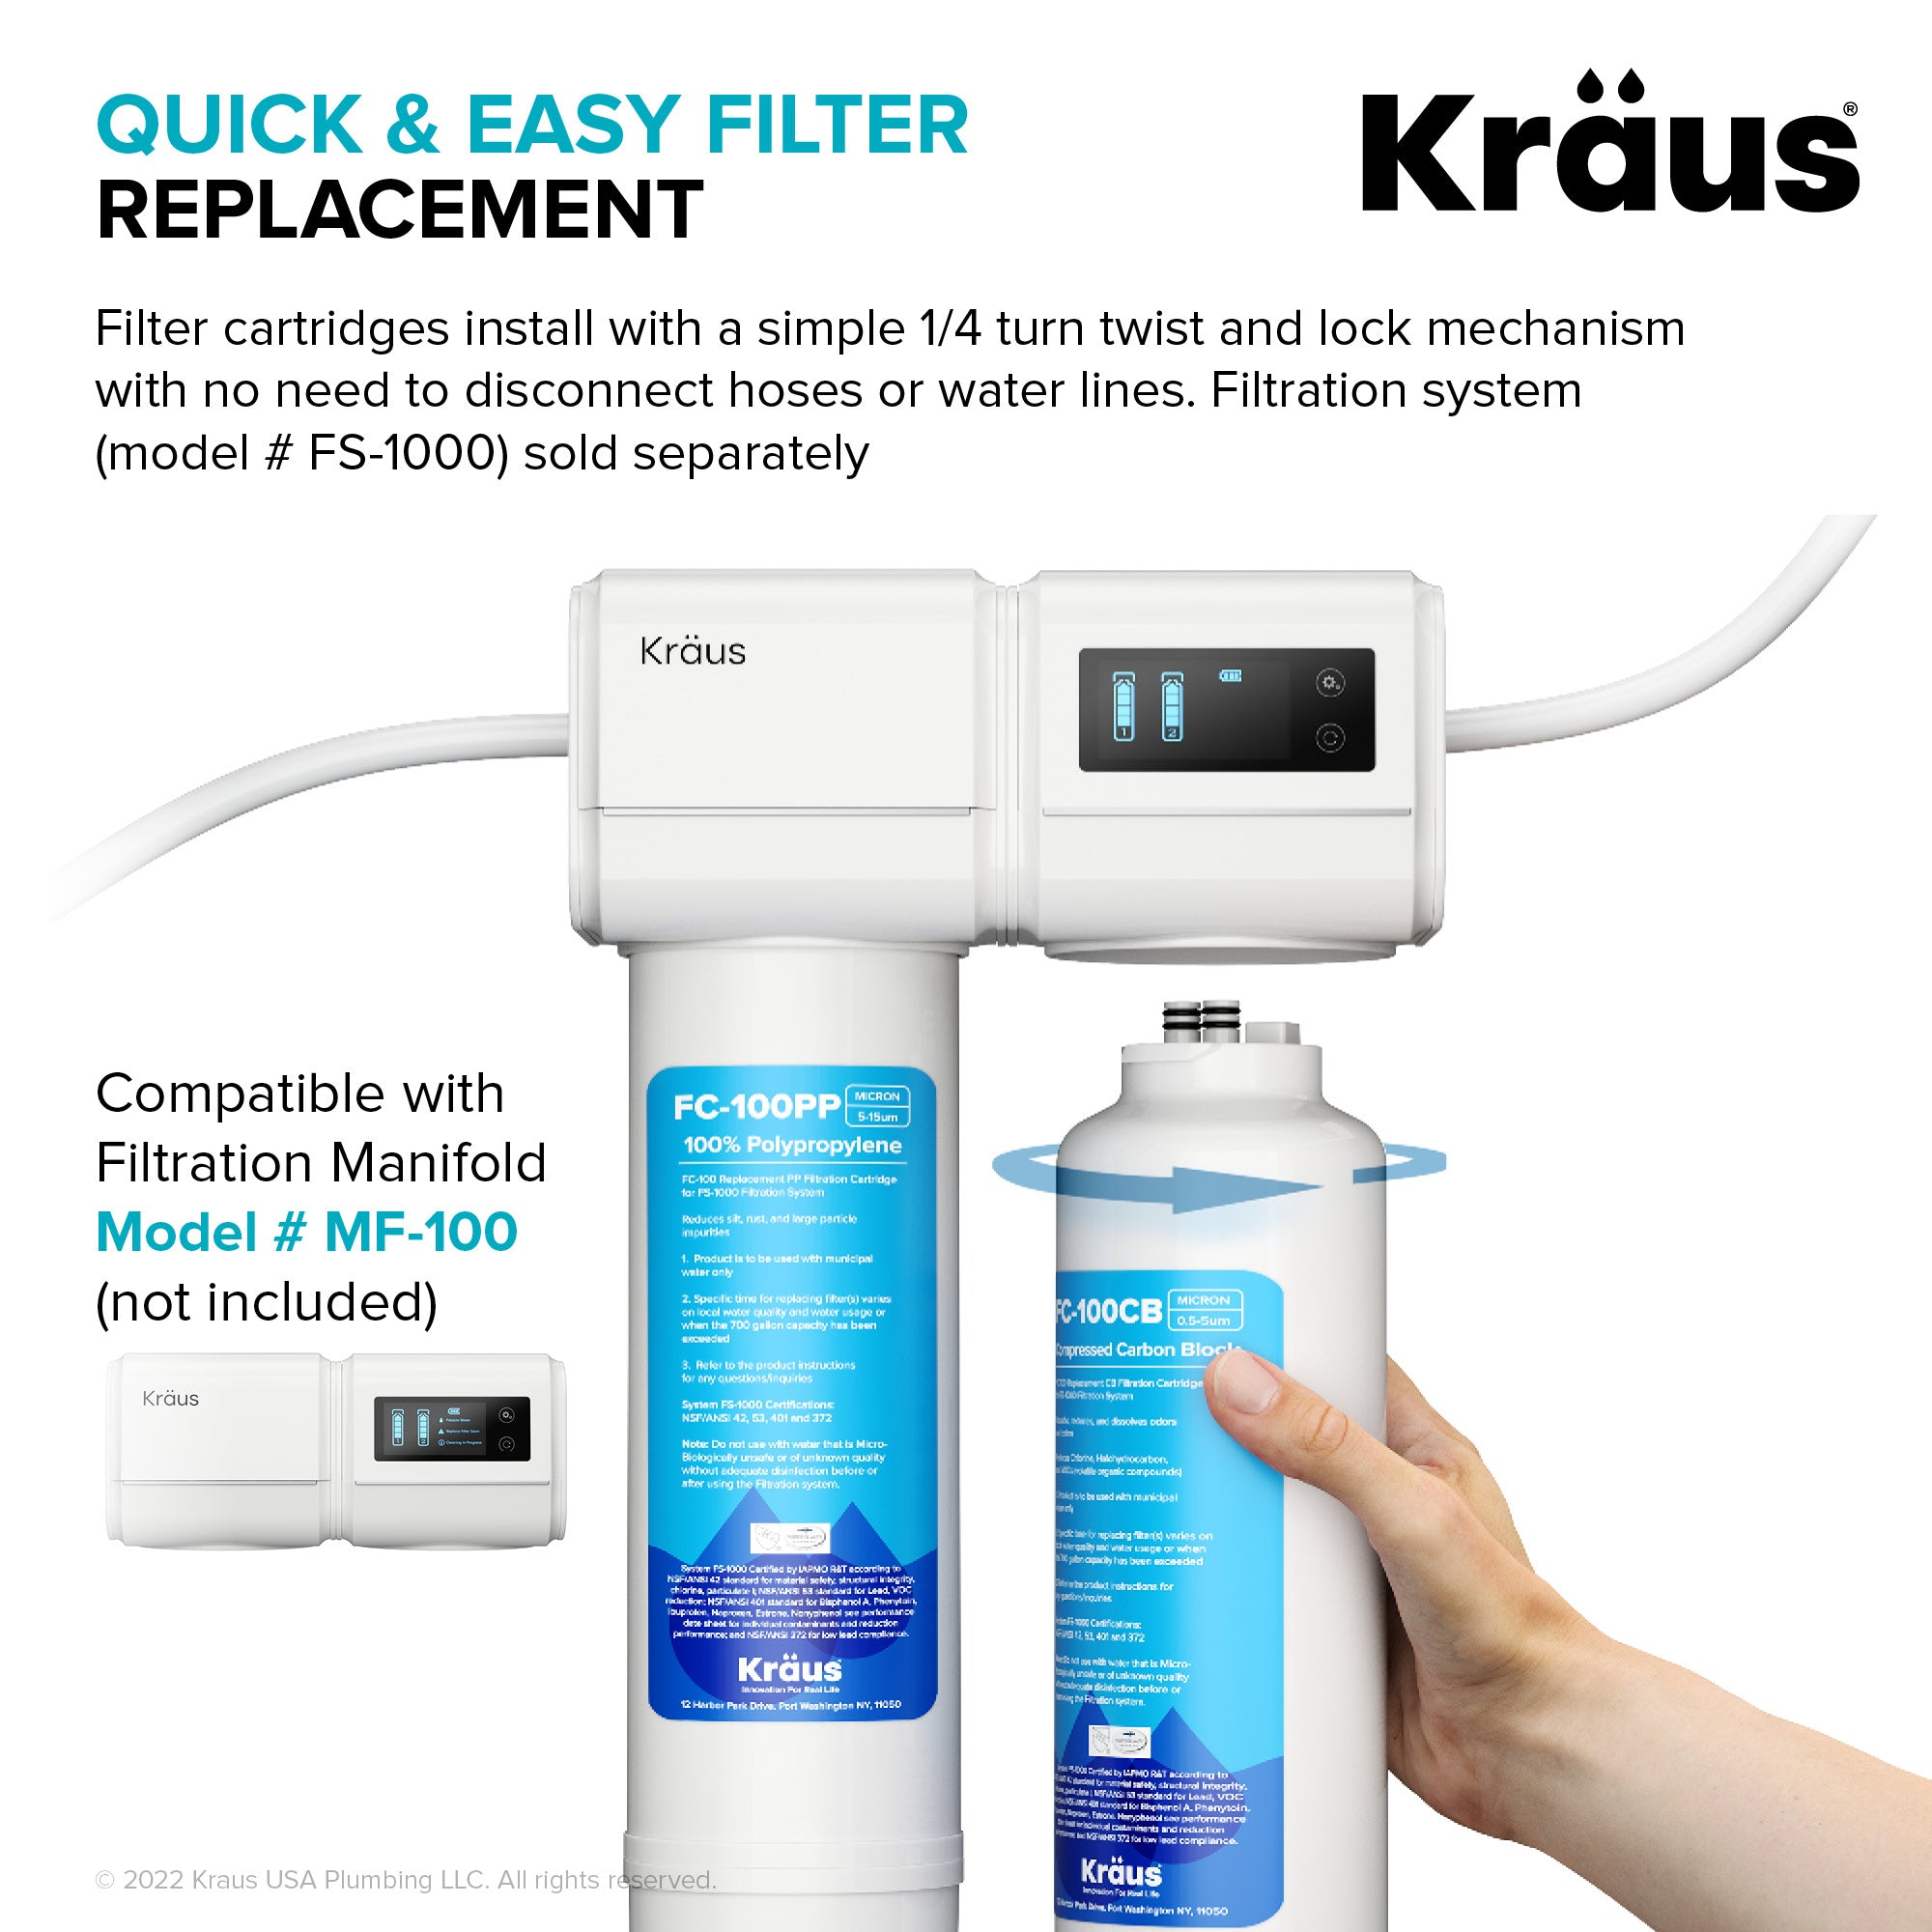 Kraus Replacement Filter Set for FS-1000 Filtration System